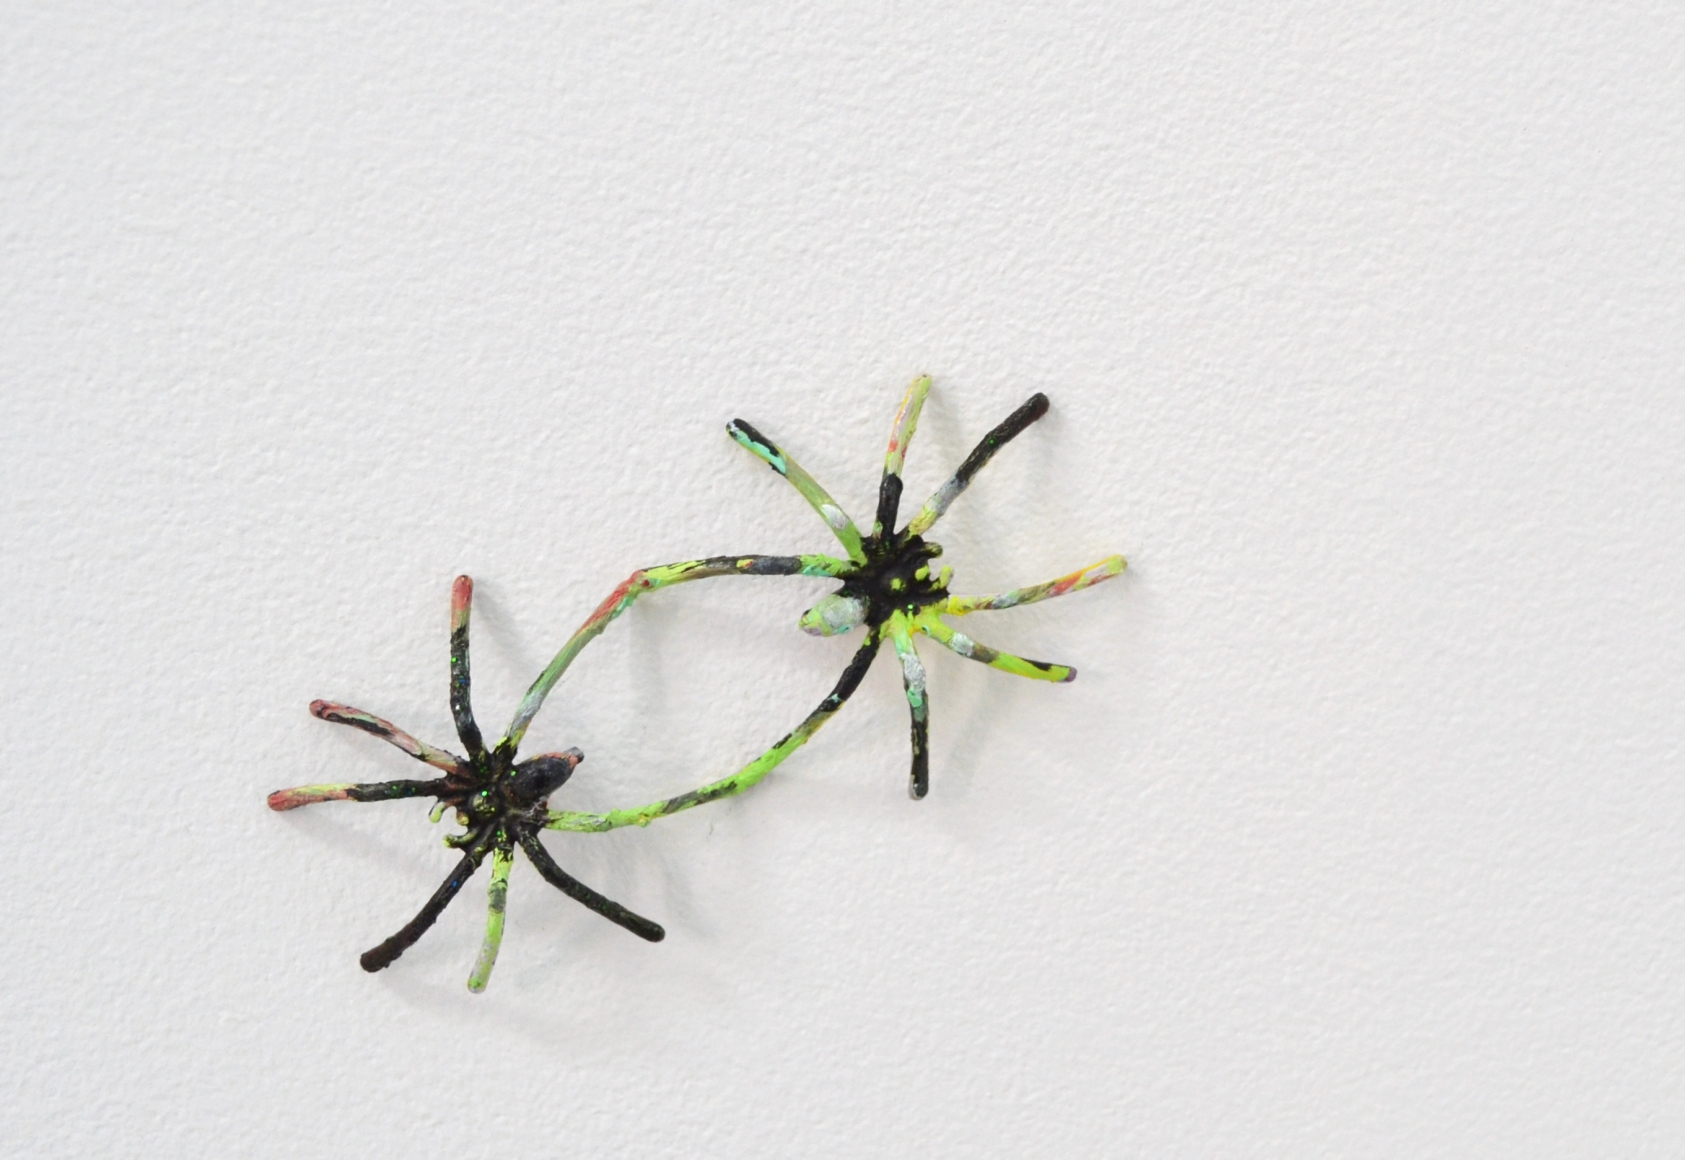 Spiders in a bag, 2014